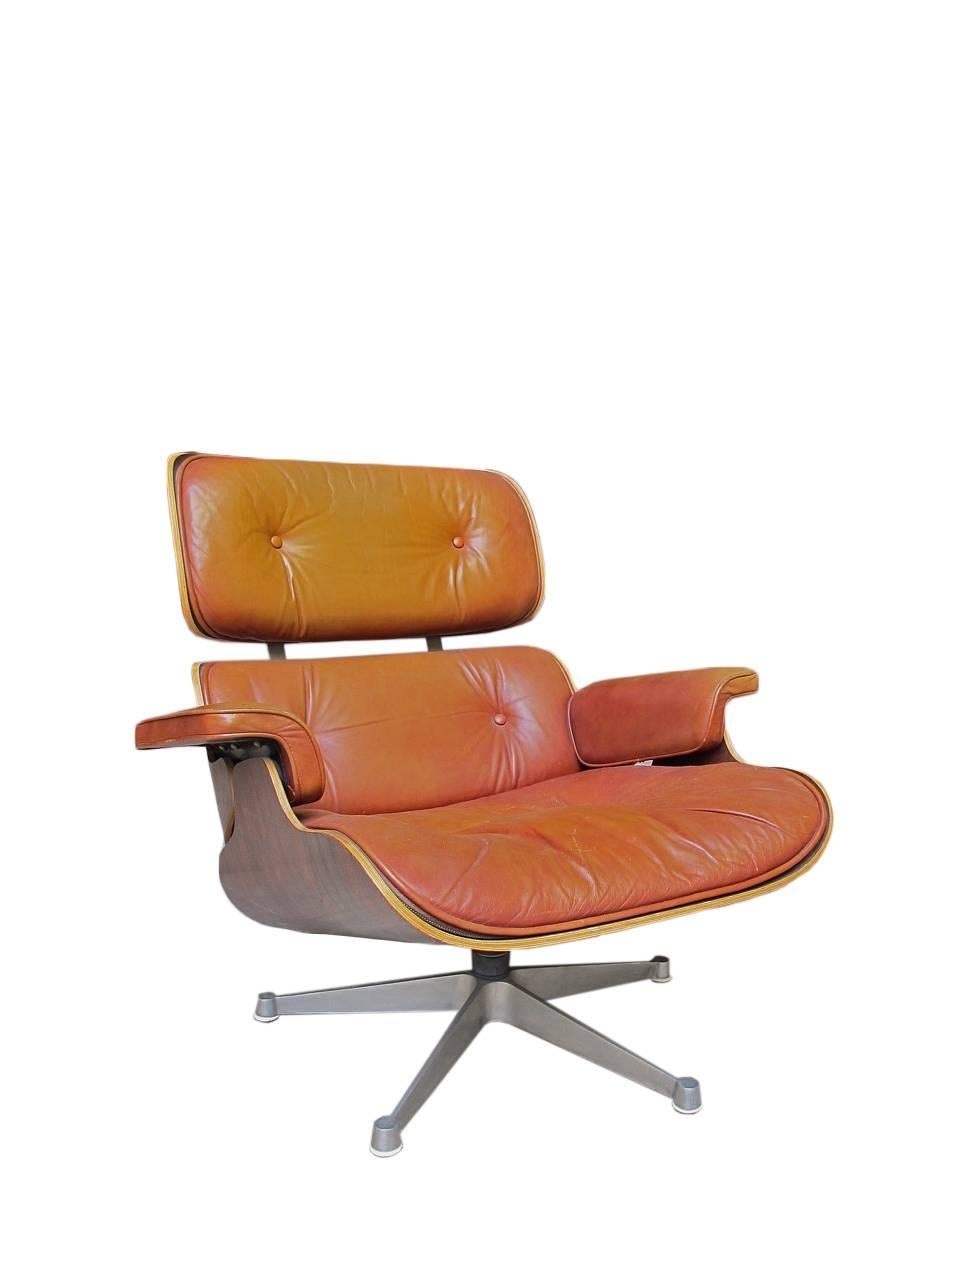 Lounge Chair and ottoman designed by Charles and Ray Eames and Herman Miller bent plywood, finished in rosewood, original leather upholstery color, cognac.  Steel legs with feet finished in pill.   
Production USA 1950.
Ottoman measures: 65 x 57 x